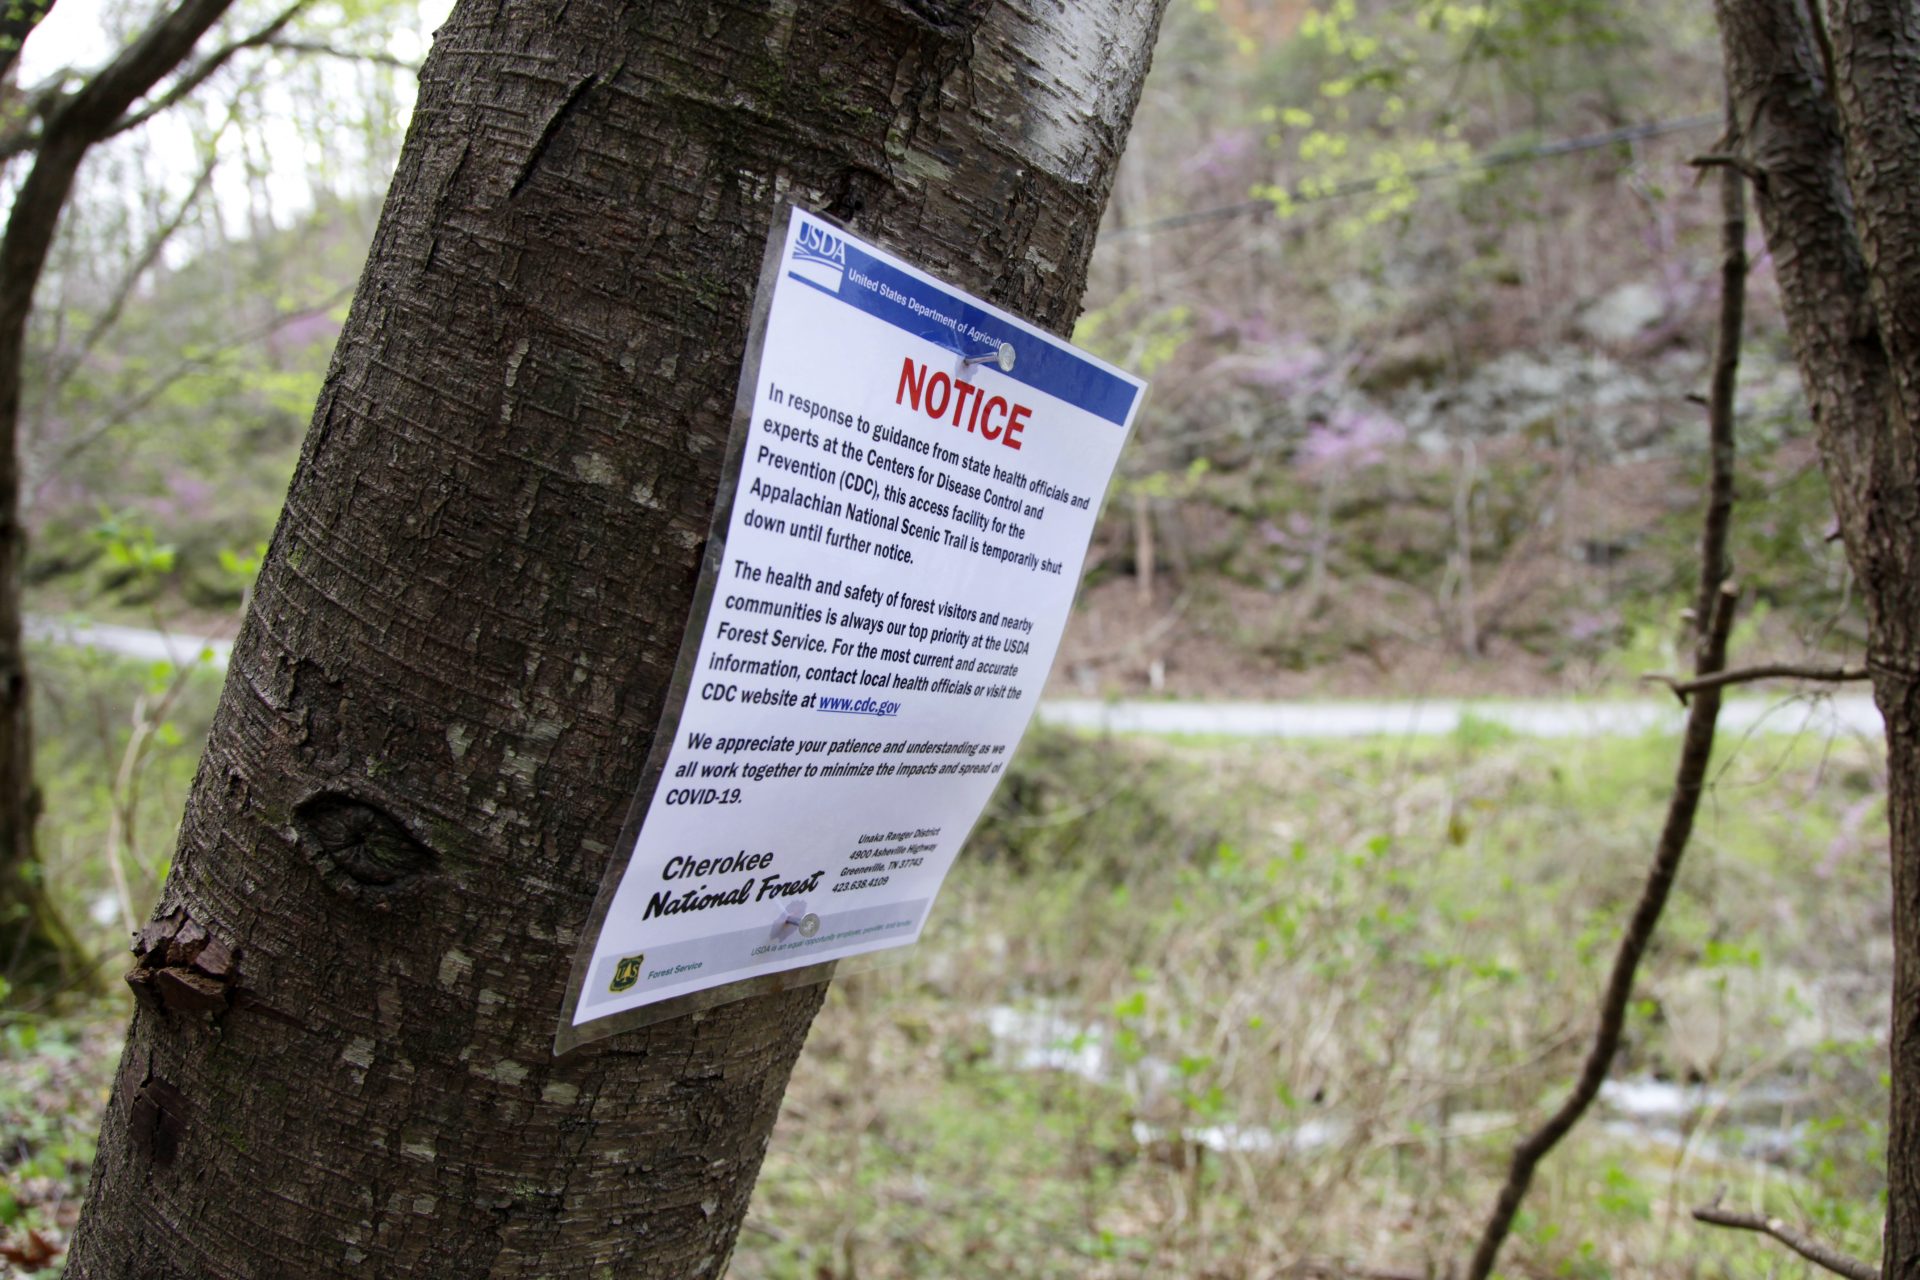 In this March 30, 2020, photo, a notice is nailed to a tree along a portion of the Appalachian Trail in Cosby, Tenn. Hikers have been asked to leave the trail immediately as trailheads continue to close due to the coronavirus outbreak.